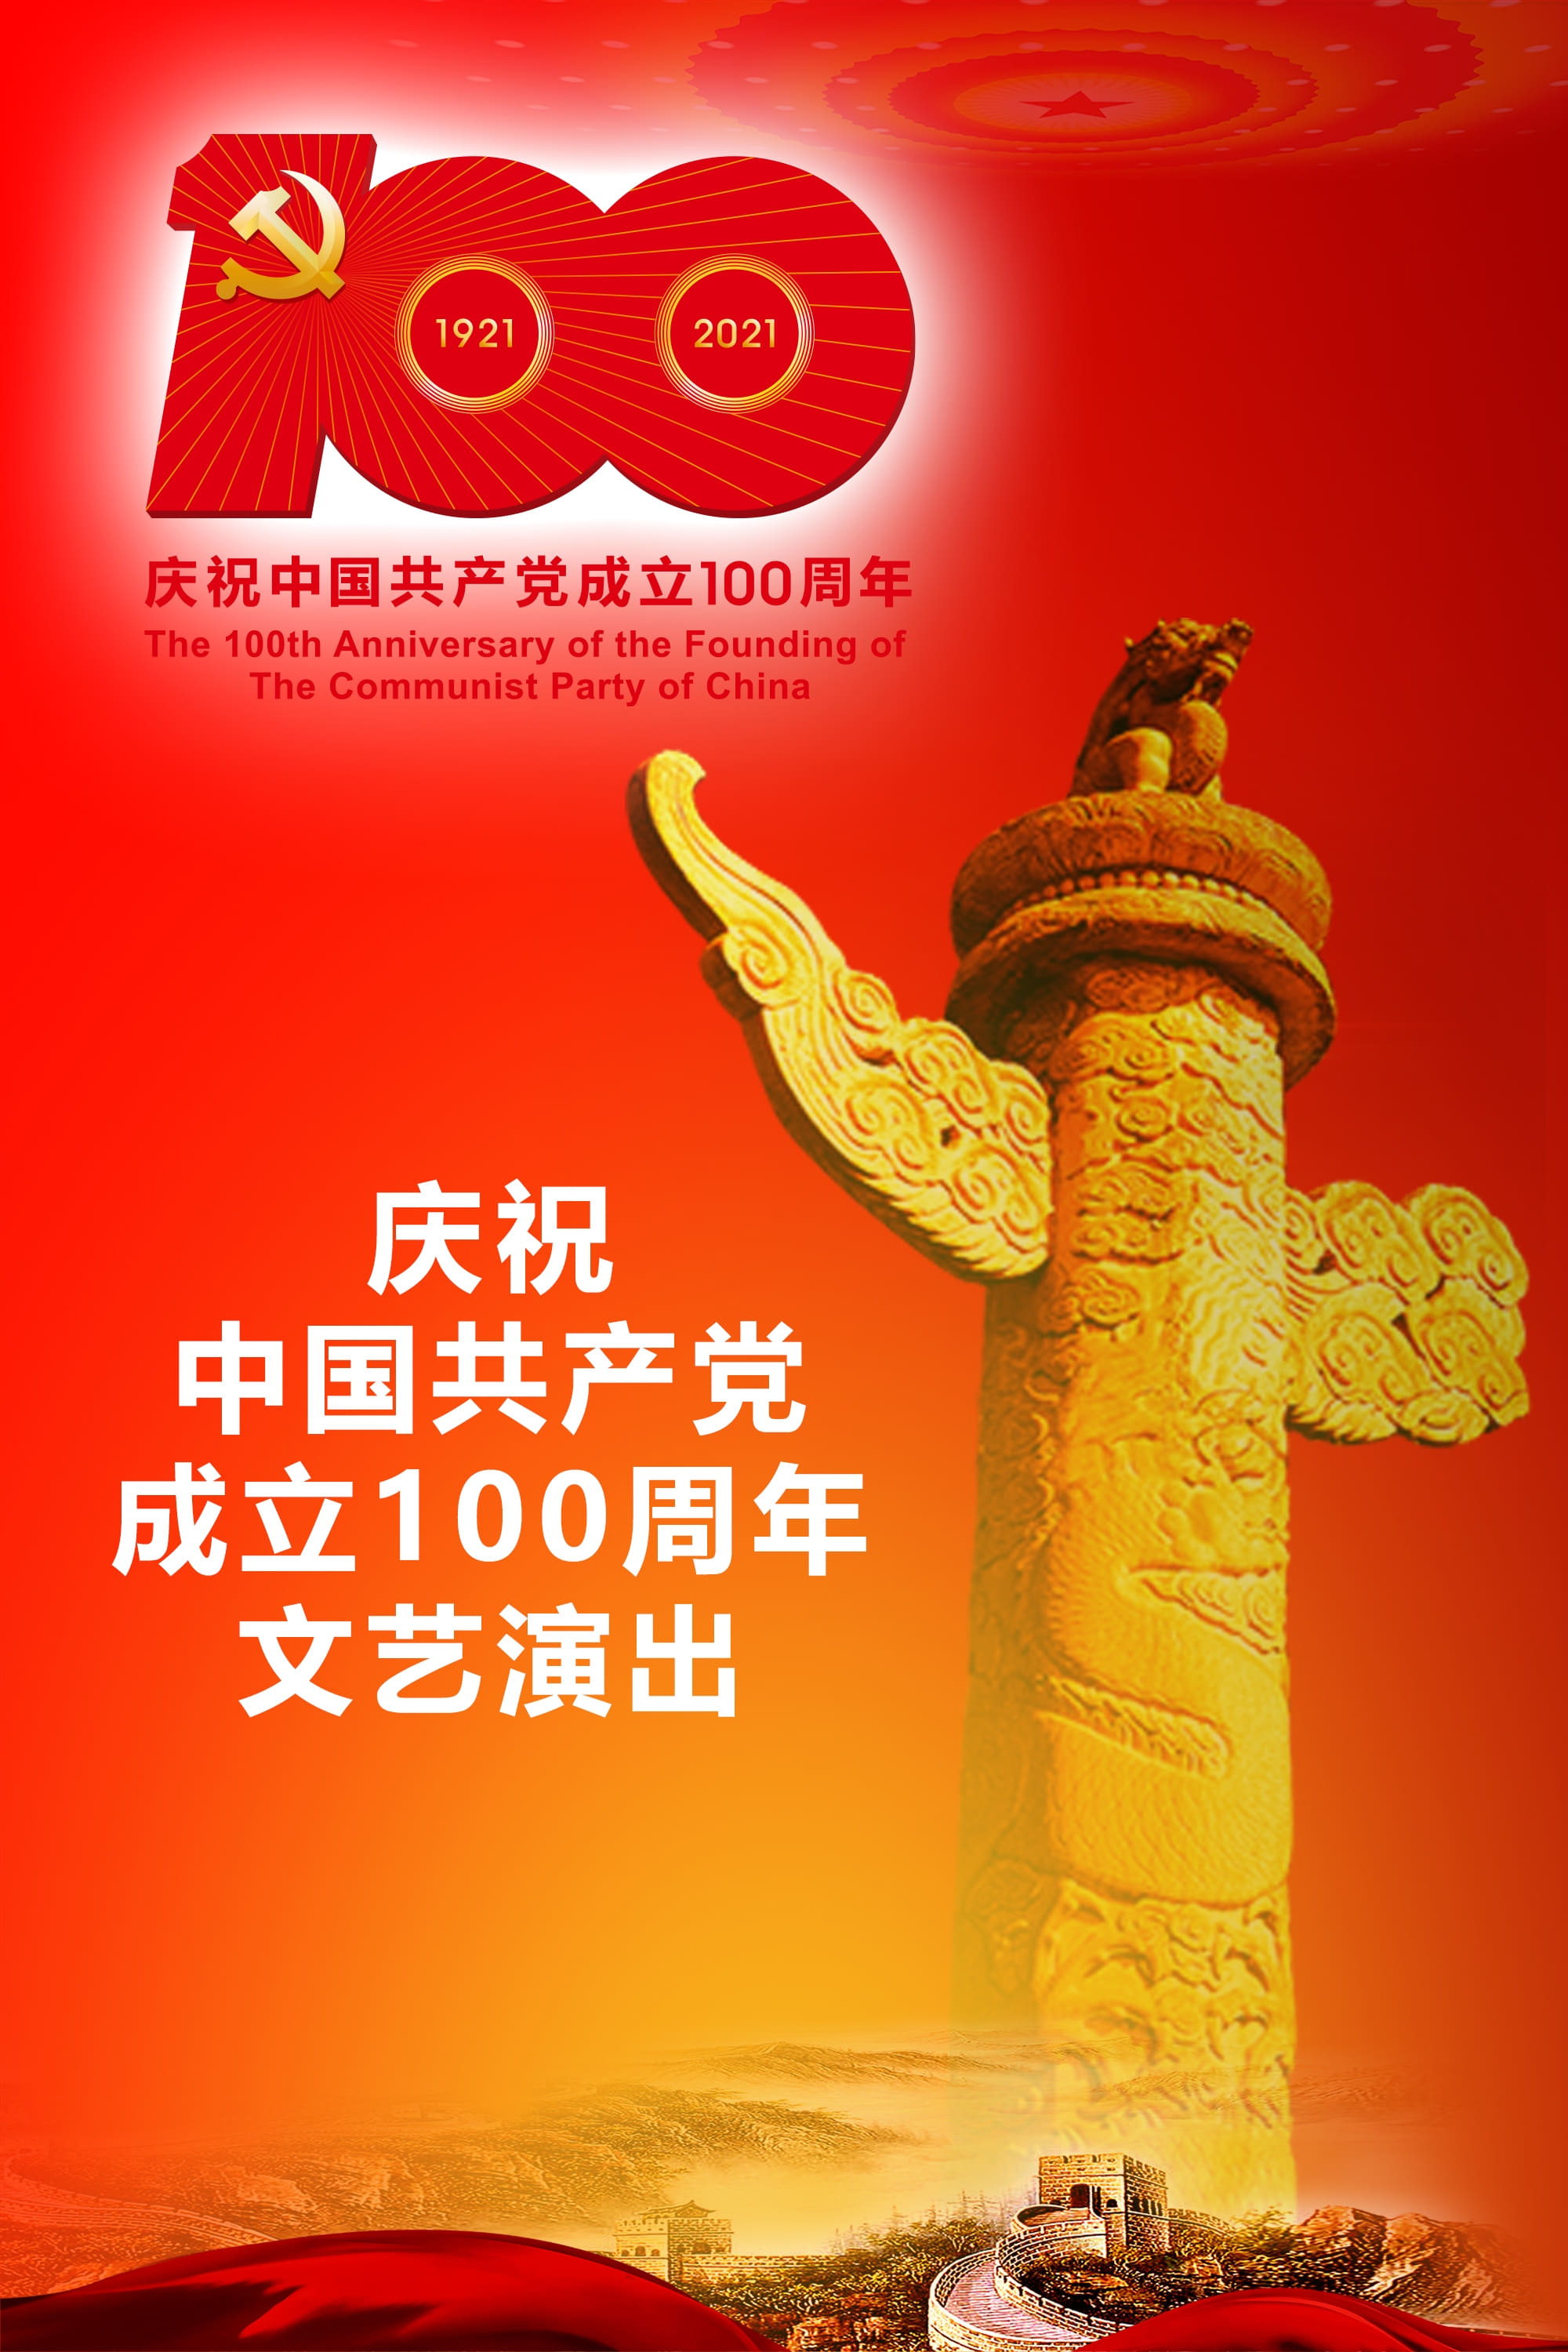 The Great Journey——The 100th Anniversary of the Founding of The Communist party of China